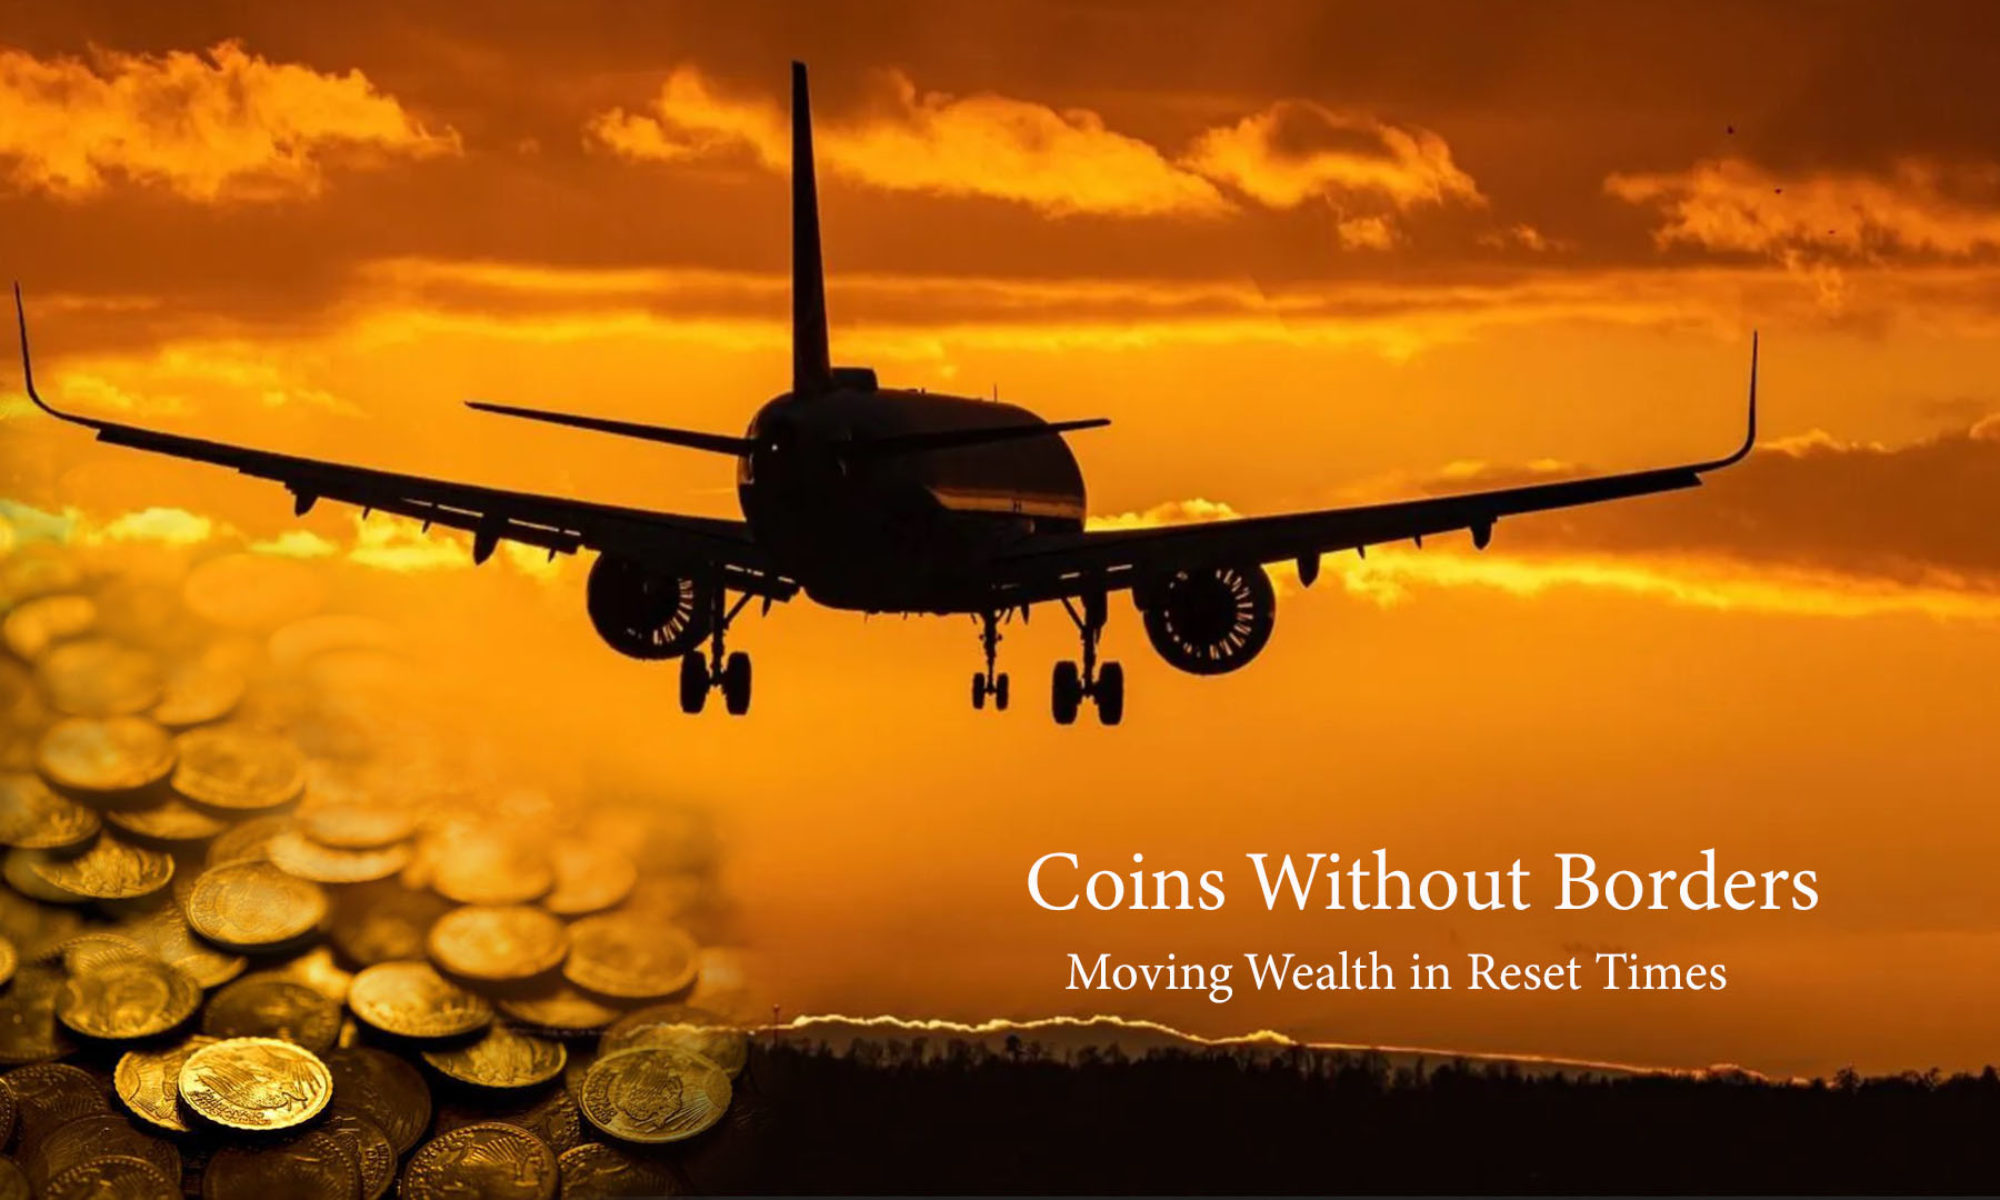 Coins Without Borders